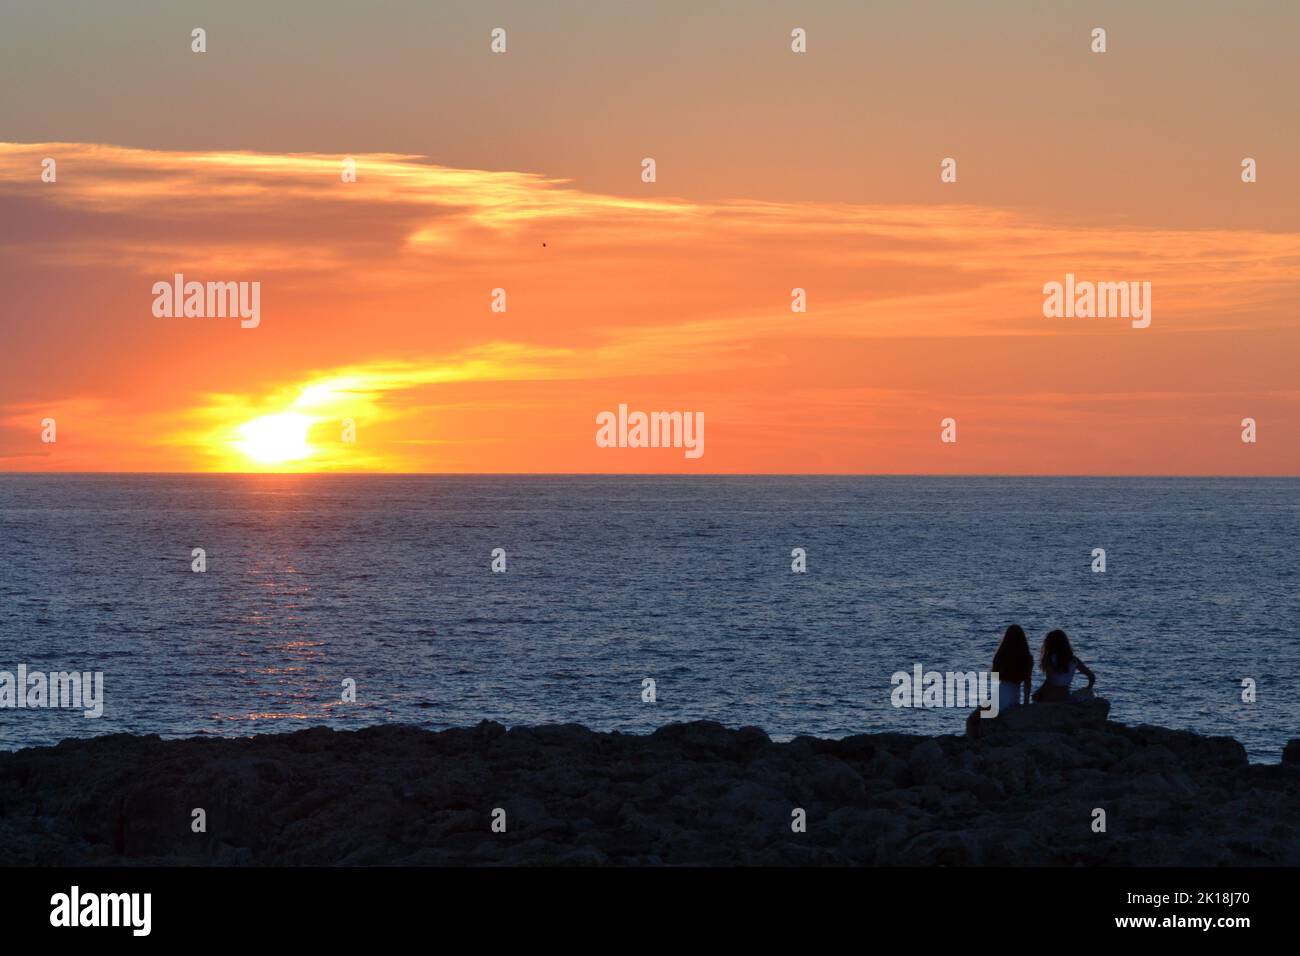 Sunset at Cala Blanca, near Cuitadella, Minorca, featuring couples silhouetted against the sky Stock Photo